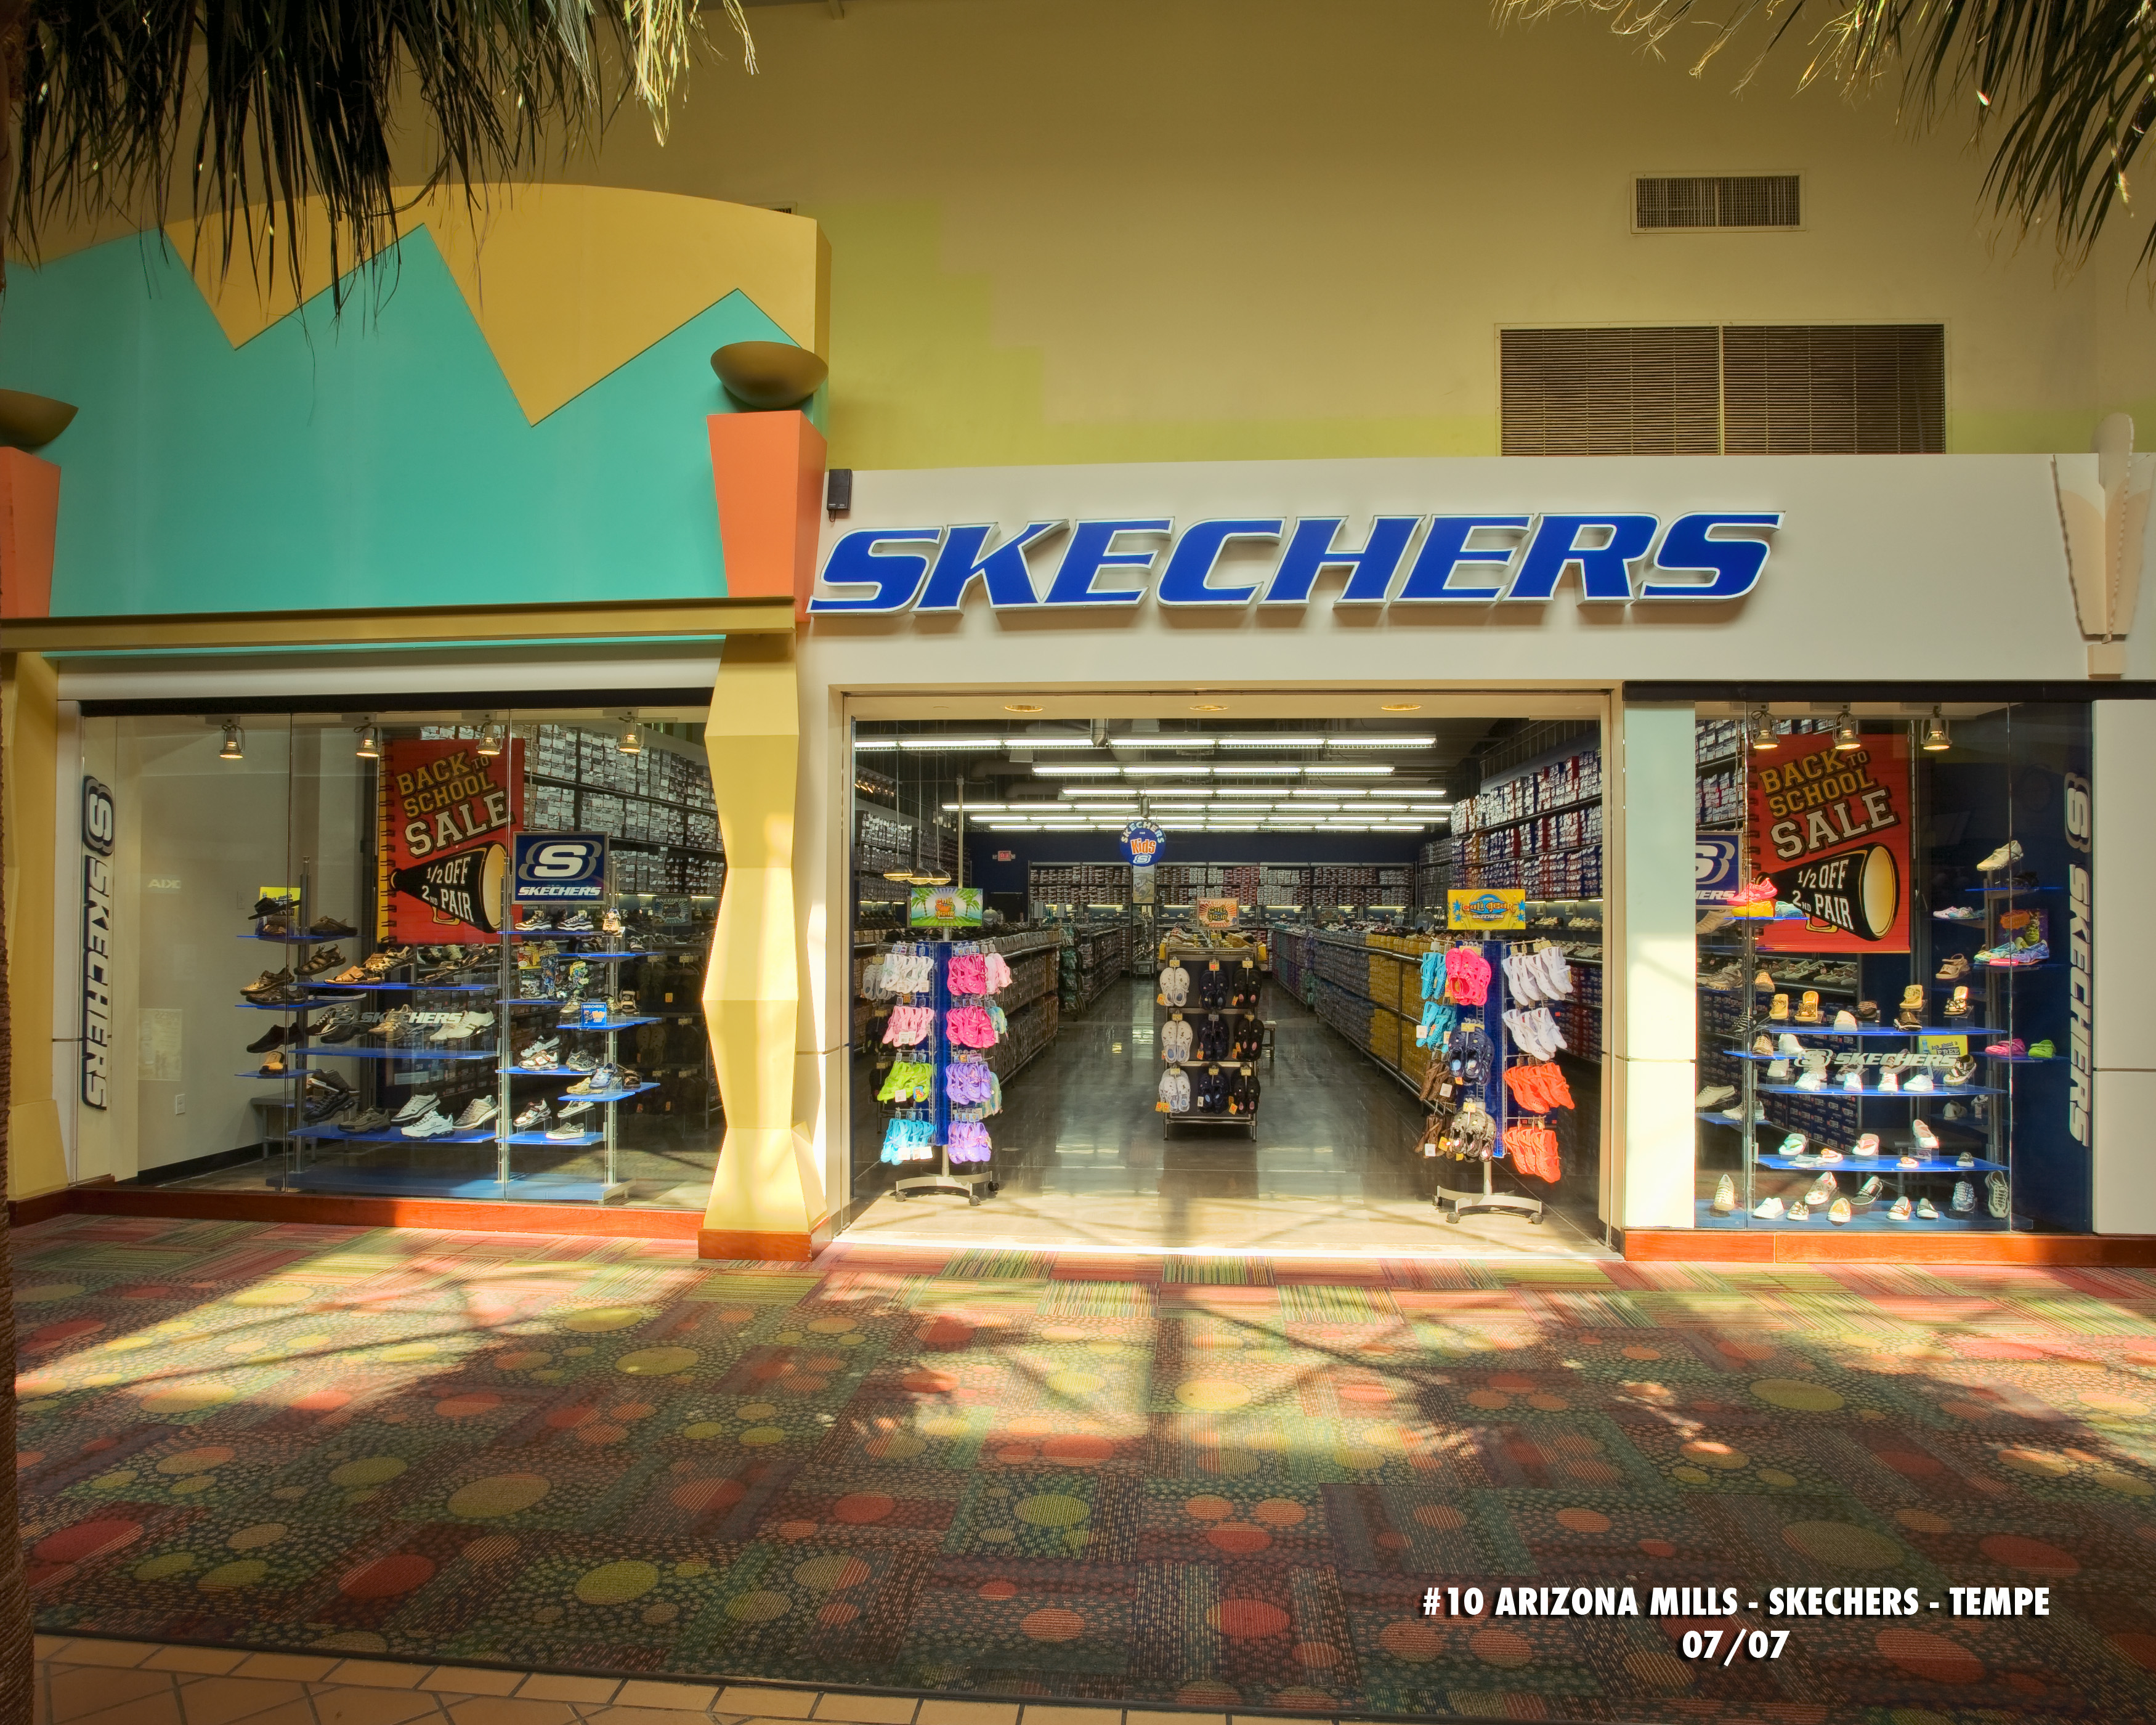 Skechers storefront. Your local shoe store in Tempe, AZ